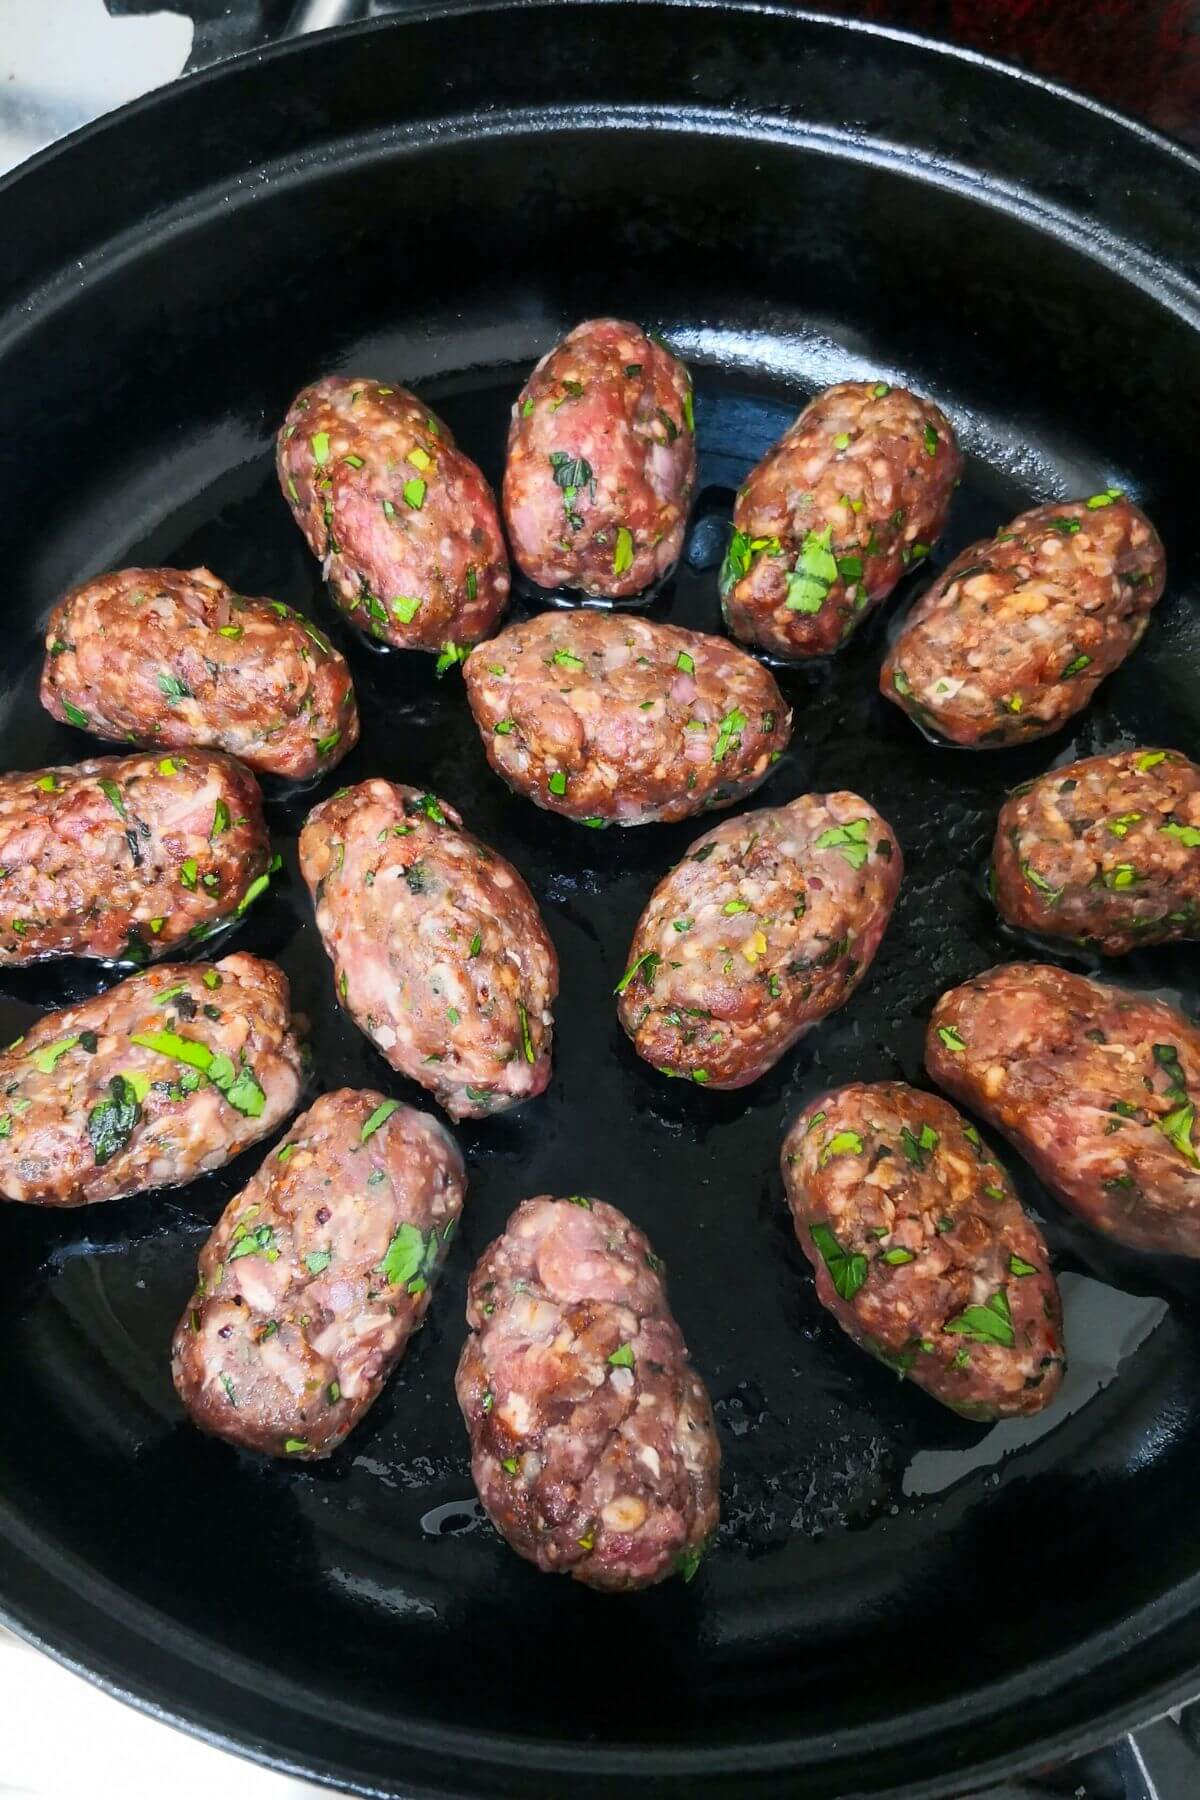 Lamb kofta cooking in a black skillet on the stove.